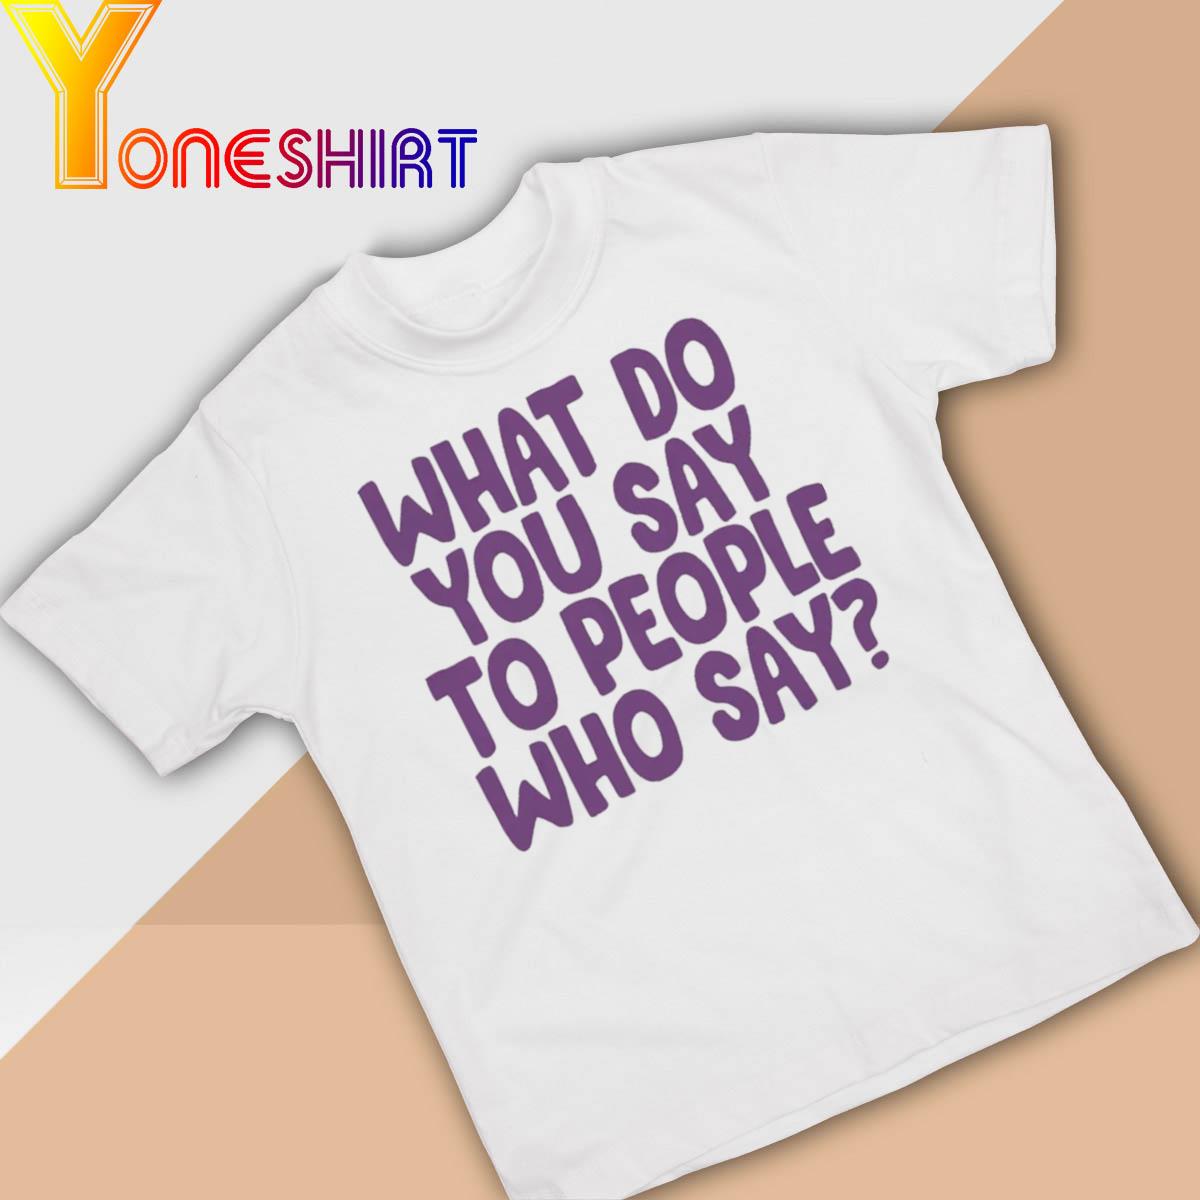 What do You say to people Who say shirt